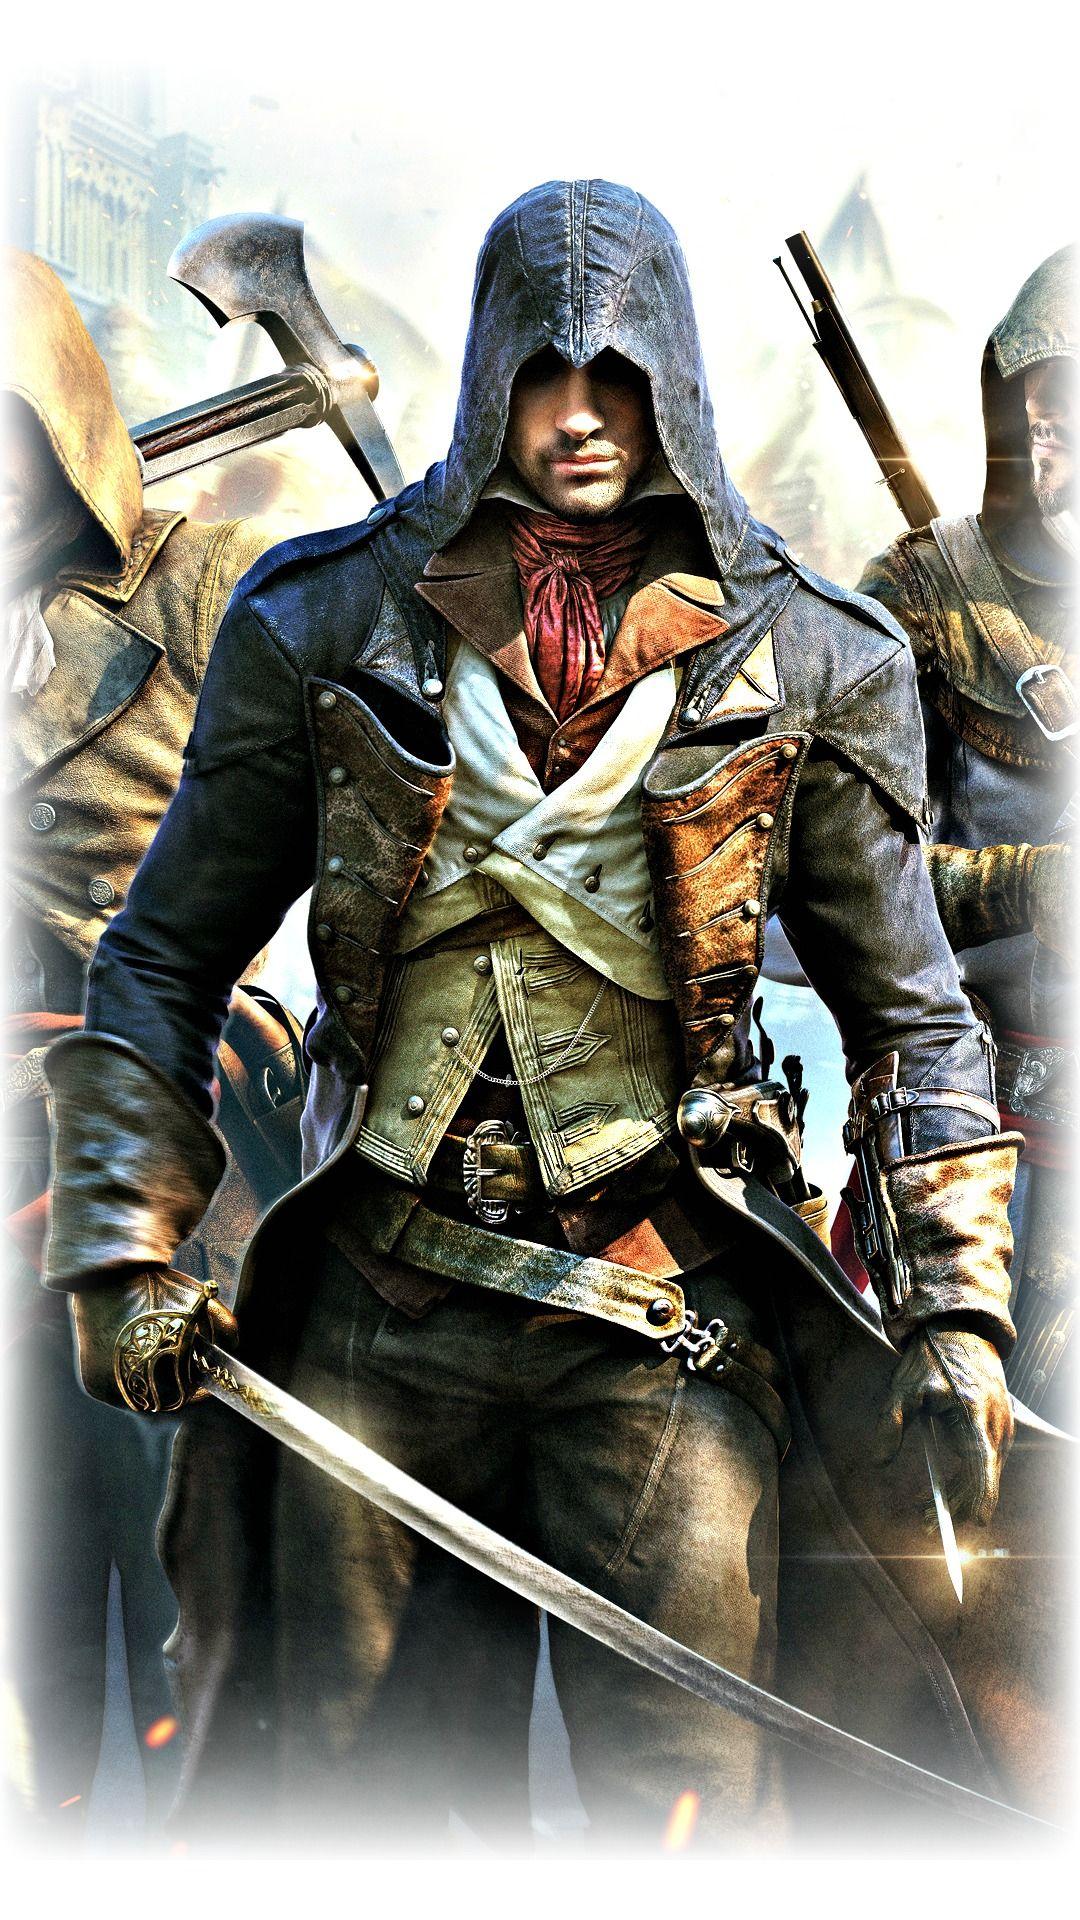 HD Assassin's Creed Wallpaper for iPhone